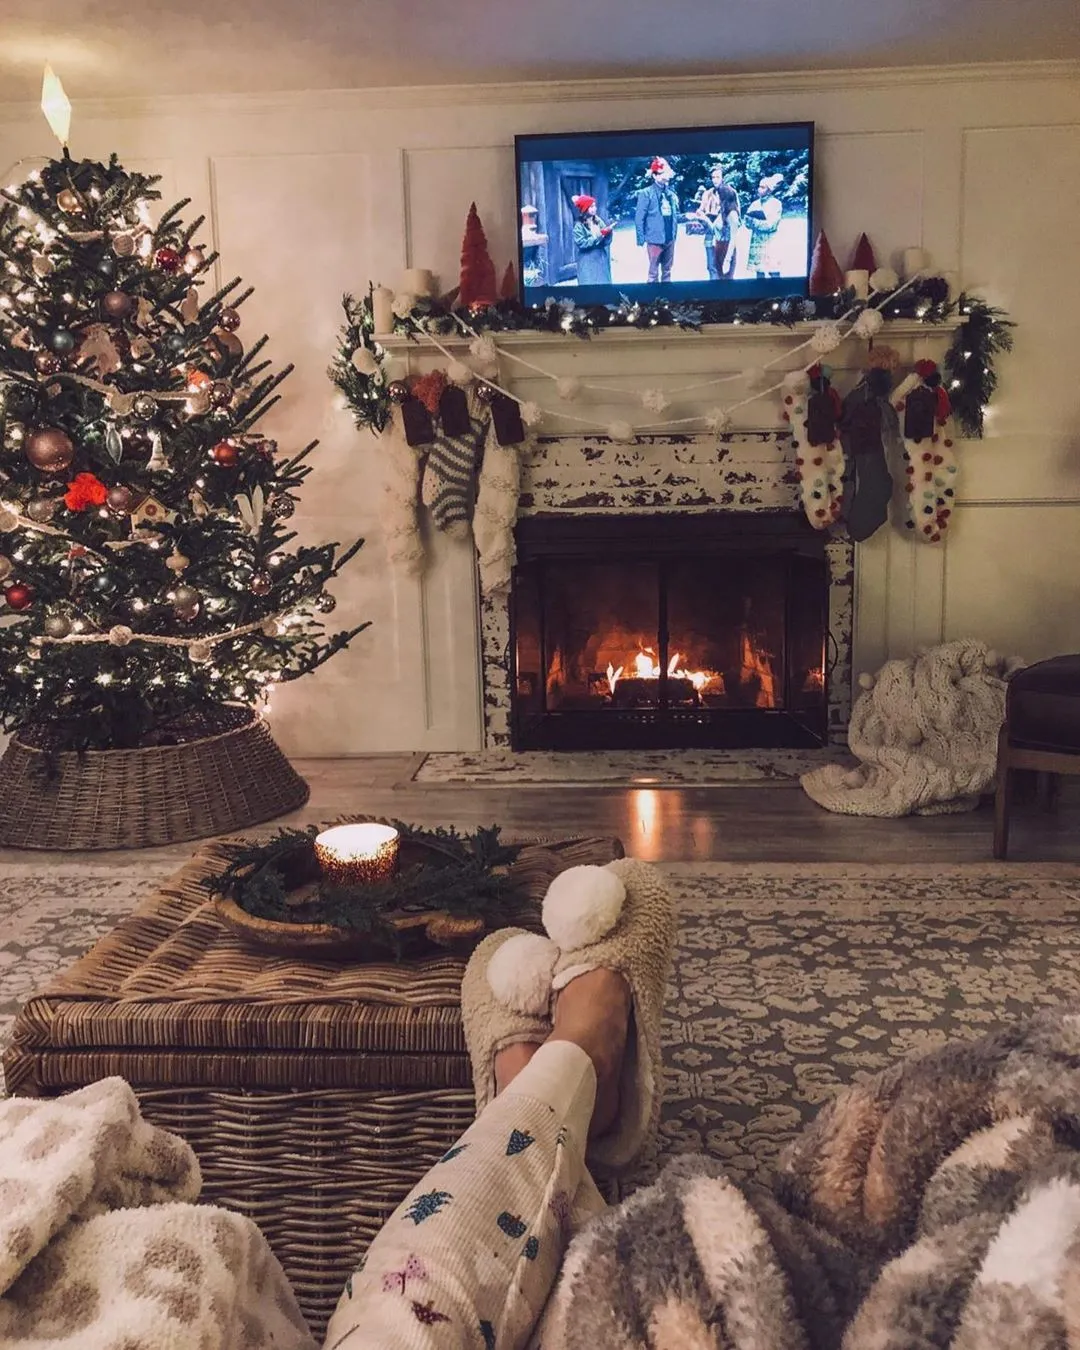 7 New Cozy Movies to Watch on Christmas Eve